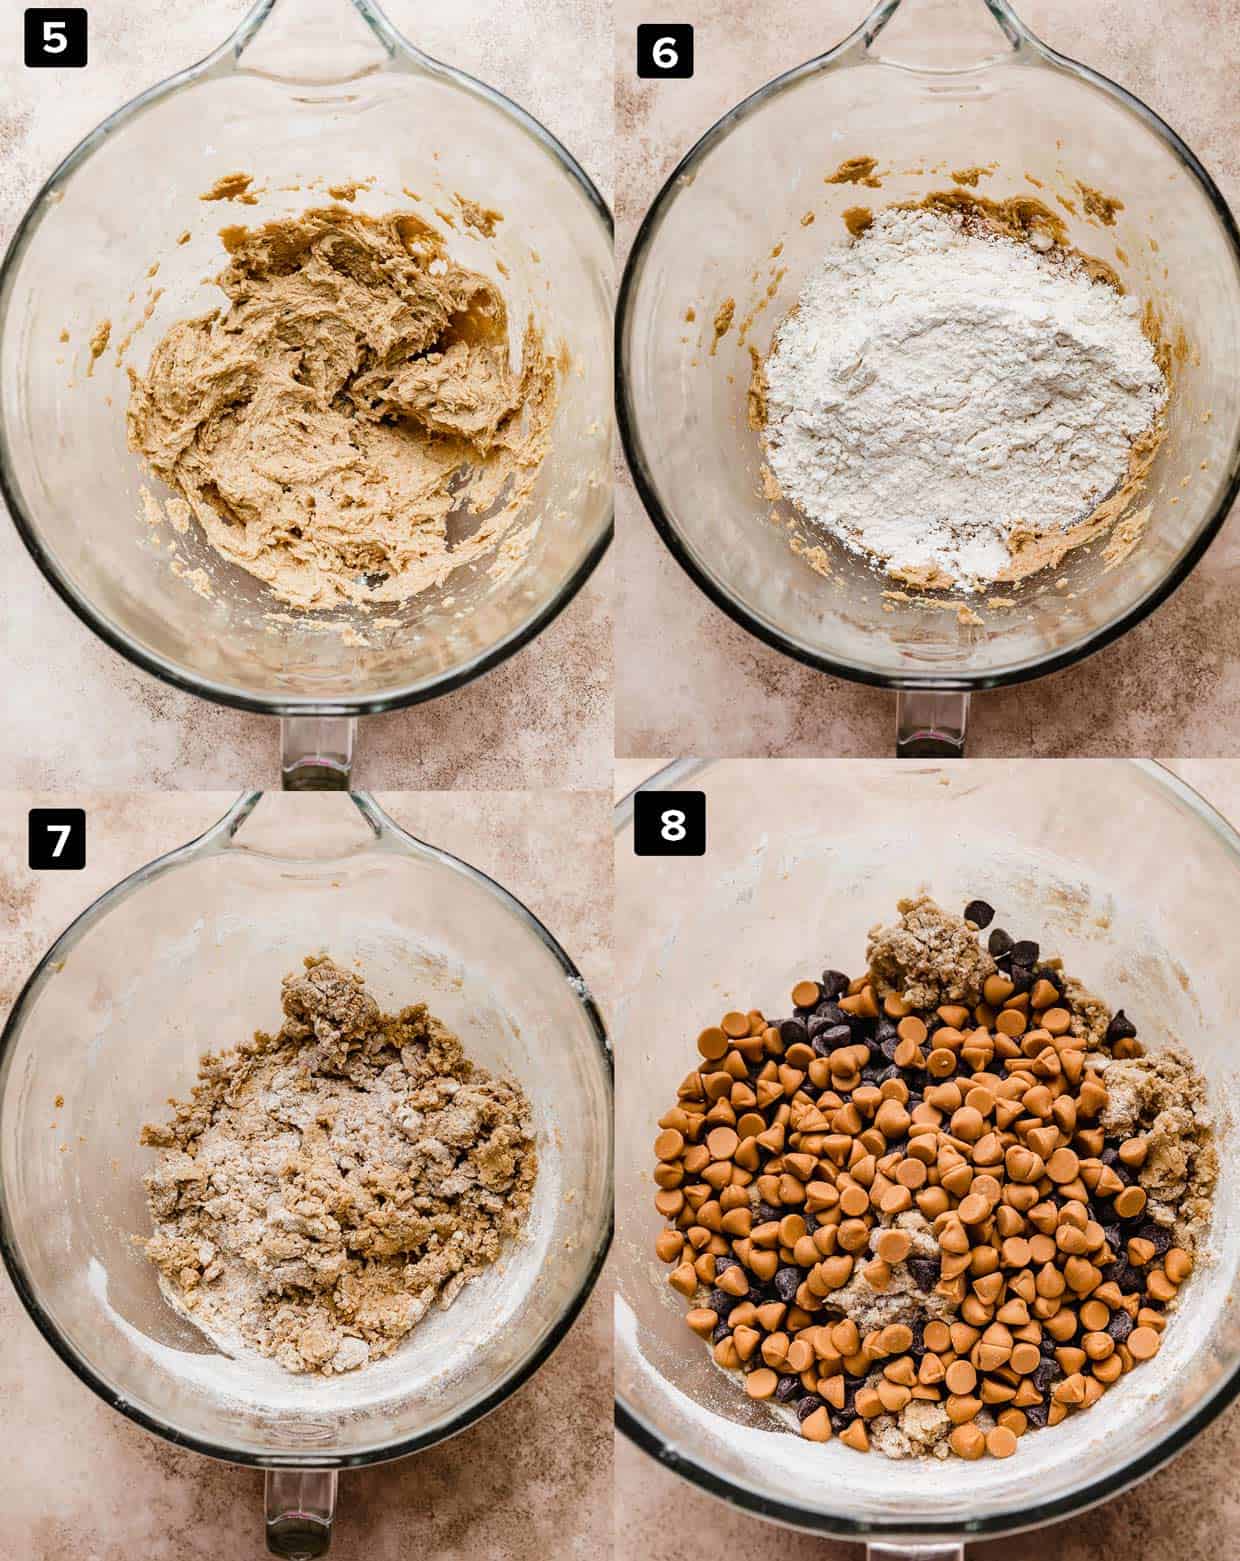 Four photos showing the making of Butterscotch Chocolate Chip Cookies with the batter in a glass bowl and adding of ingredients.